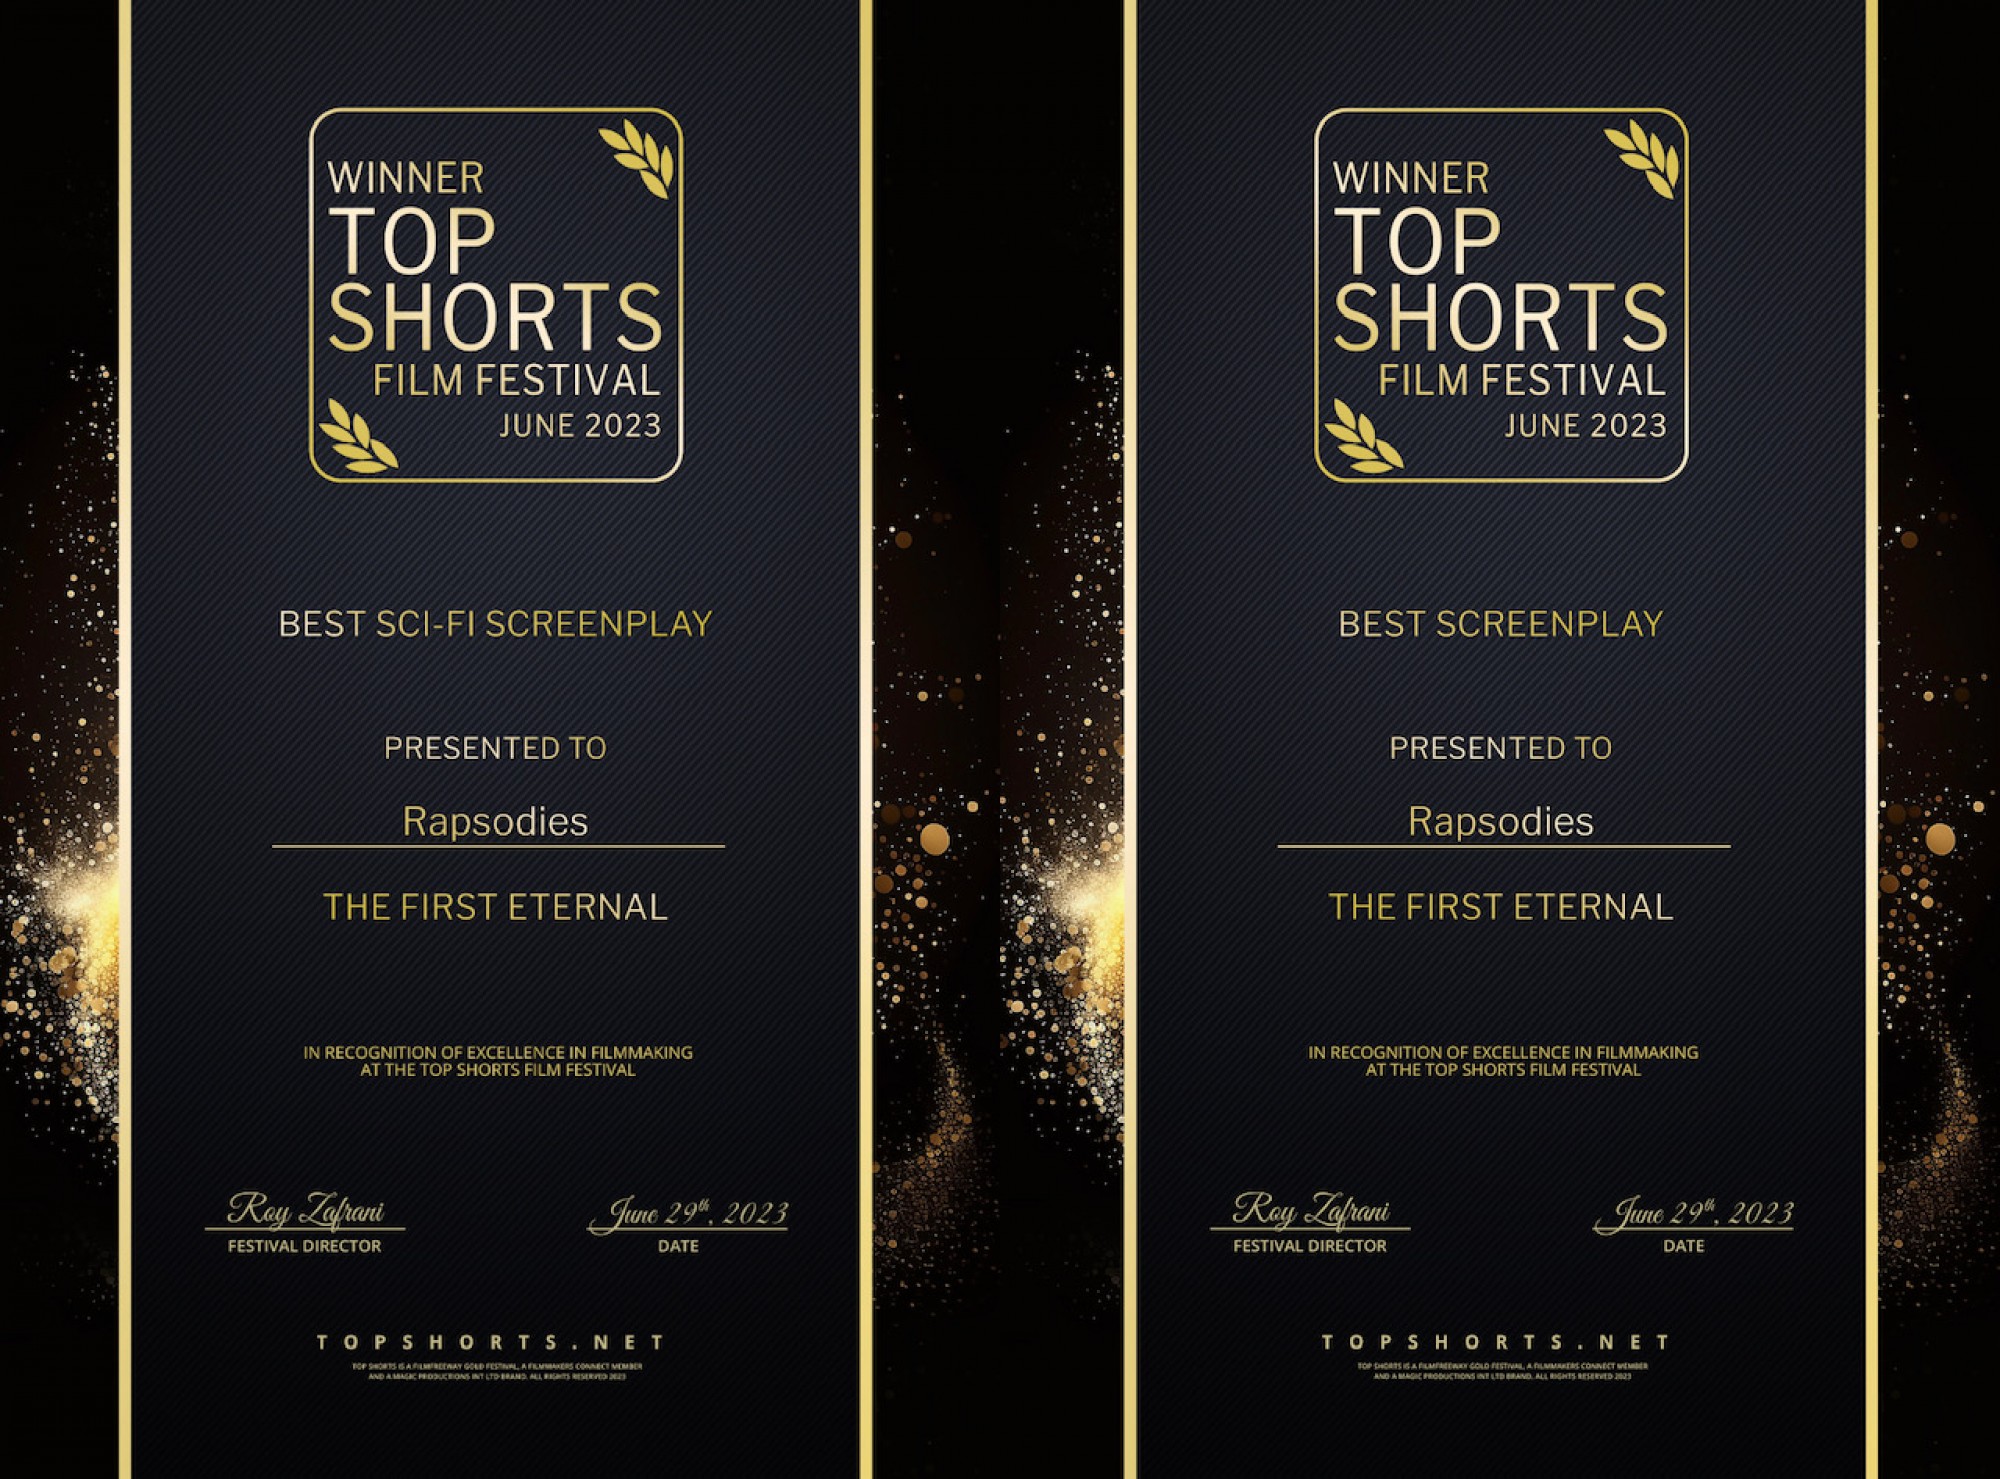 The First Eternal Best Screenplay at Top Shorts!